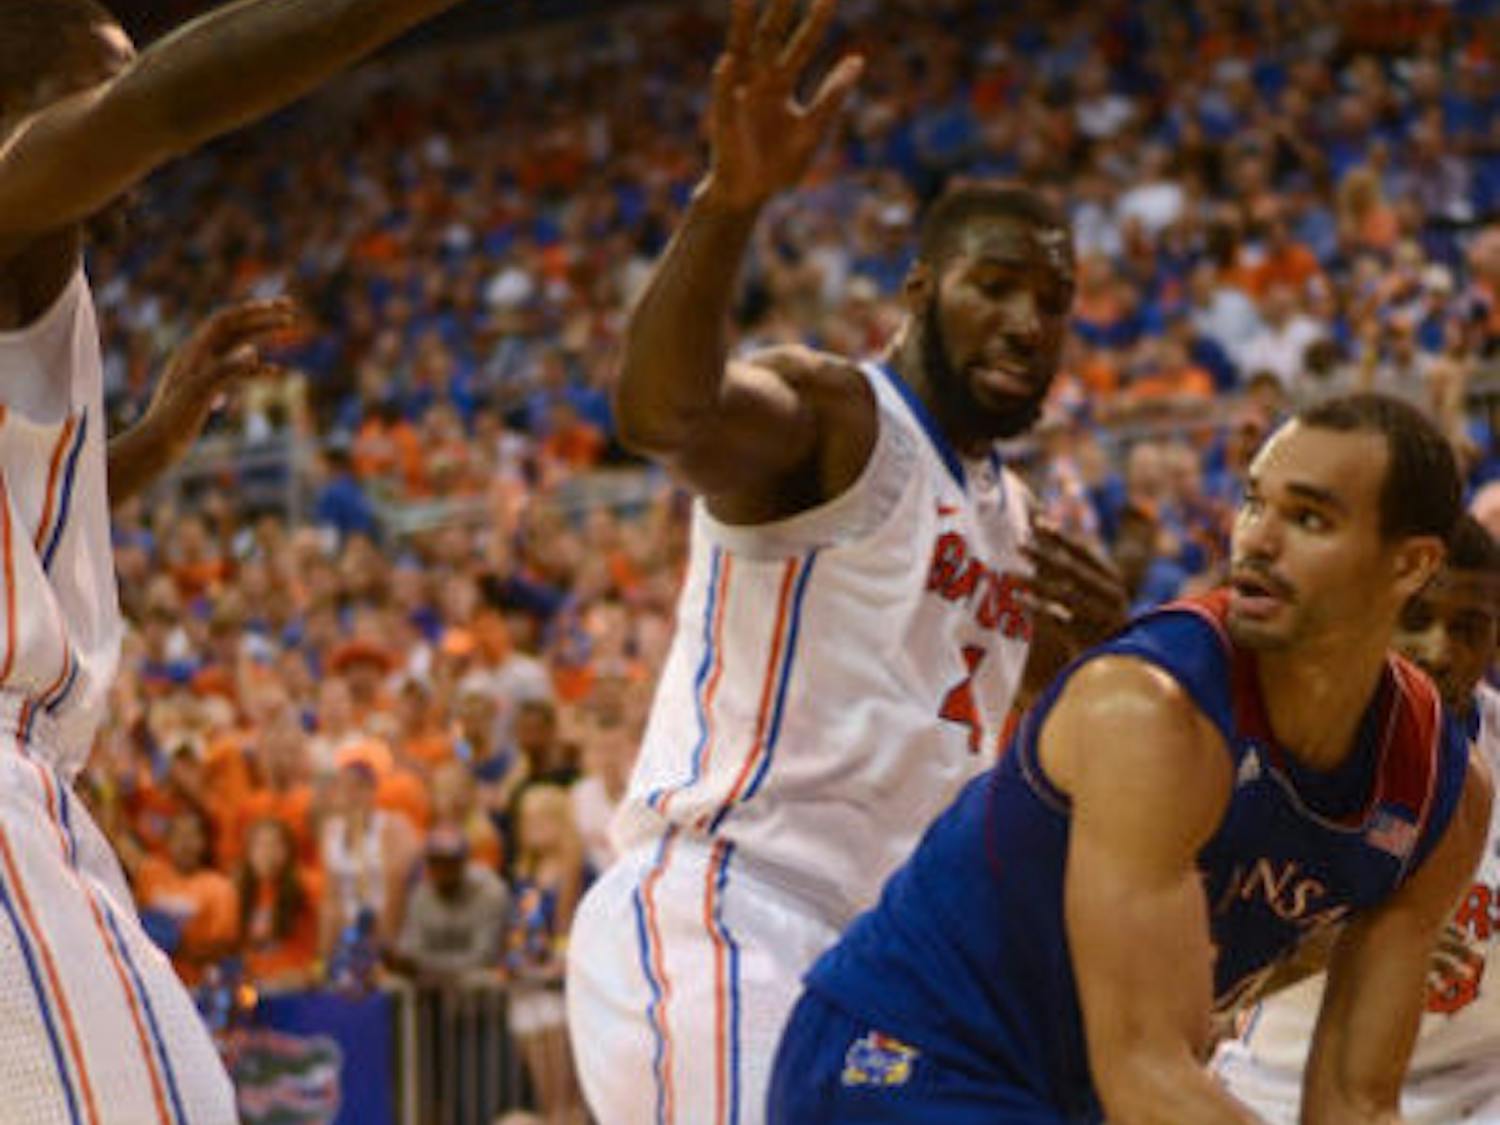 Gators senior center Patric Young (4) defends Kansas forward Perry Ellis during No. 19 Florida's 67-61 win against No. 13 Kansas on Tuesday night in the O'Connell Center.